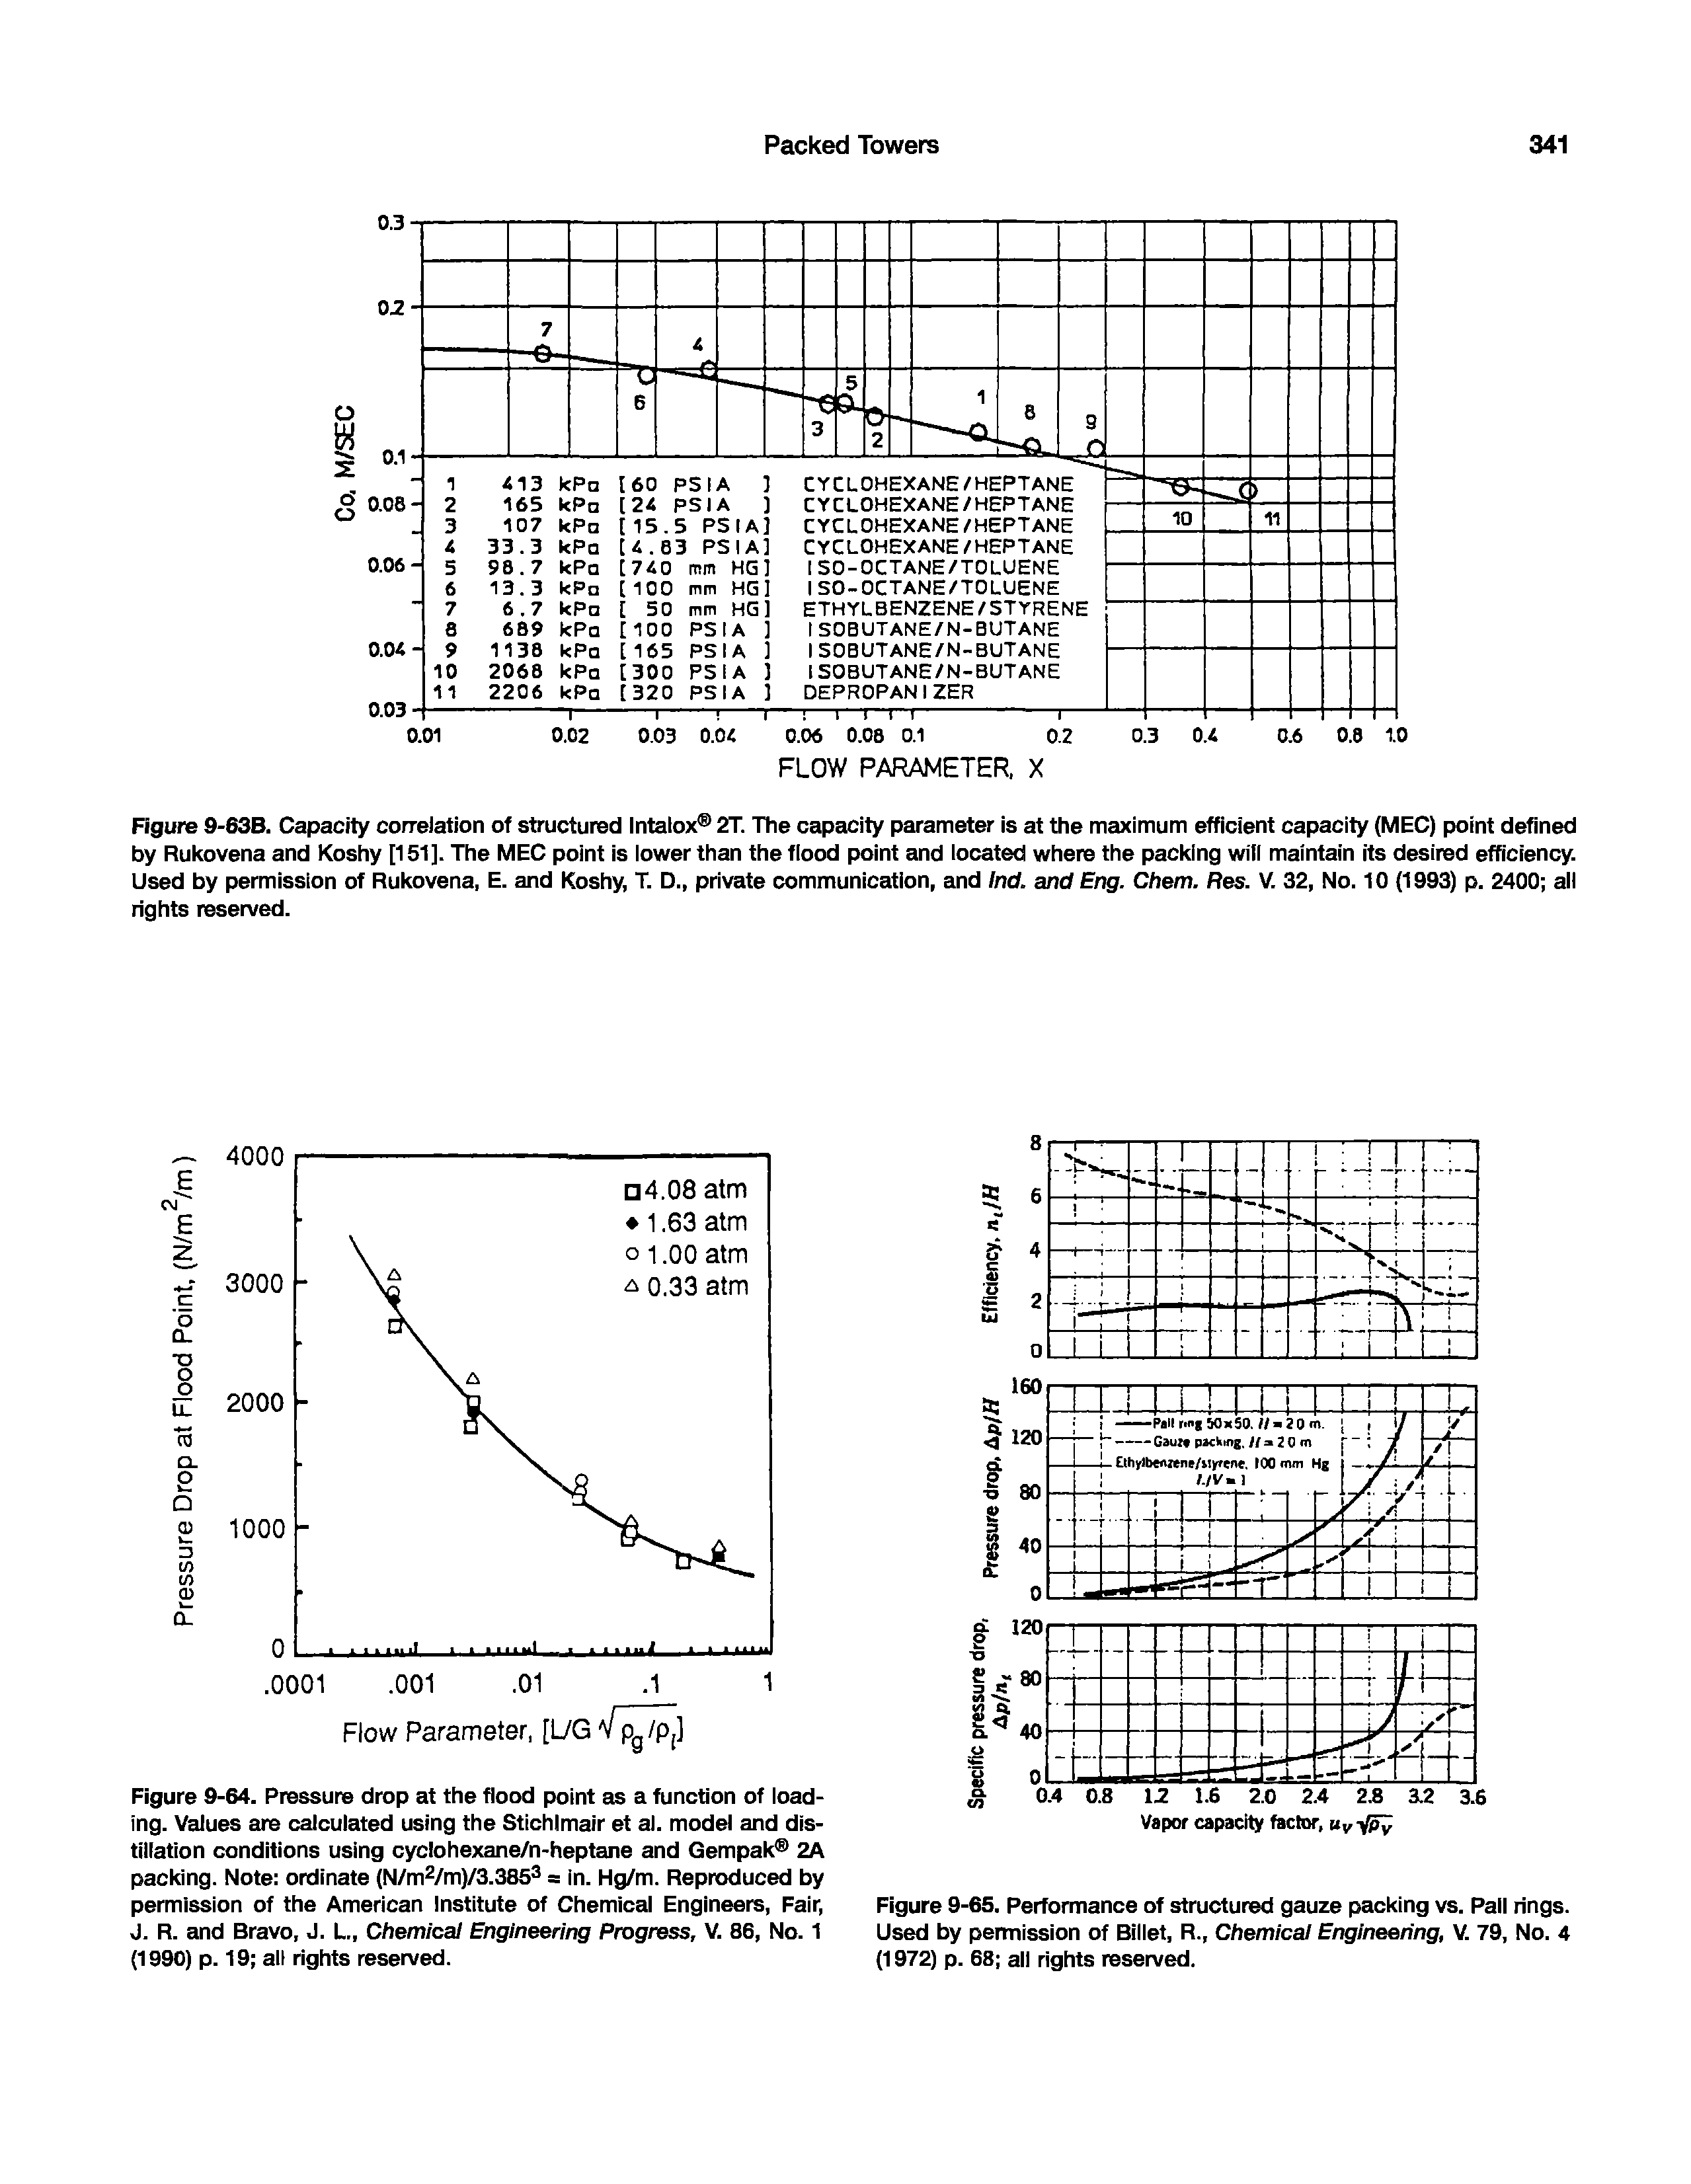 Figure 9-65. Performance of structured gauze packing vs. Pall rings. Used by permission of Biiiet, R., Chemical Engineering, V. 79, No. 4 (1972) p. 68 ali rights reserved.